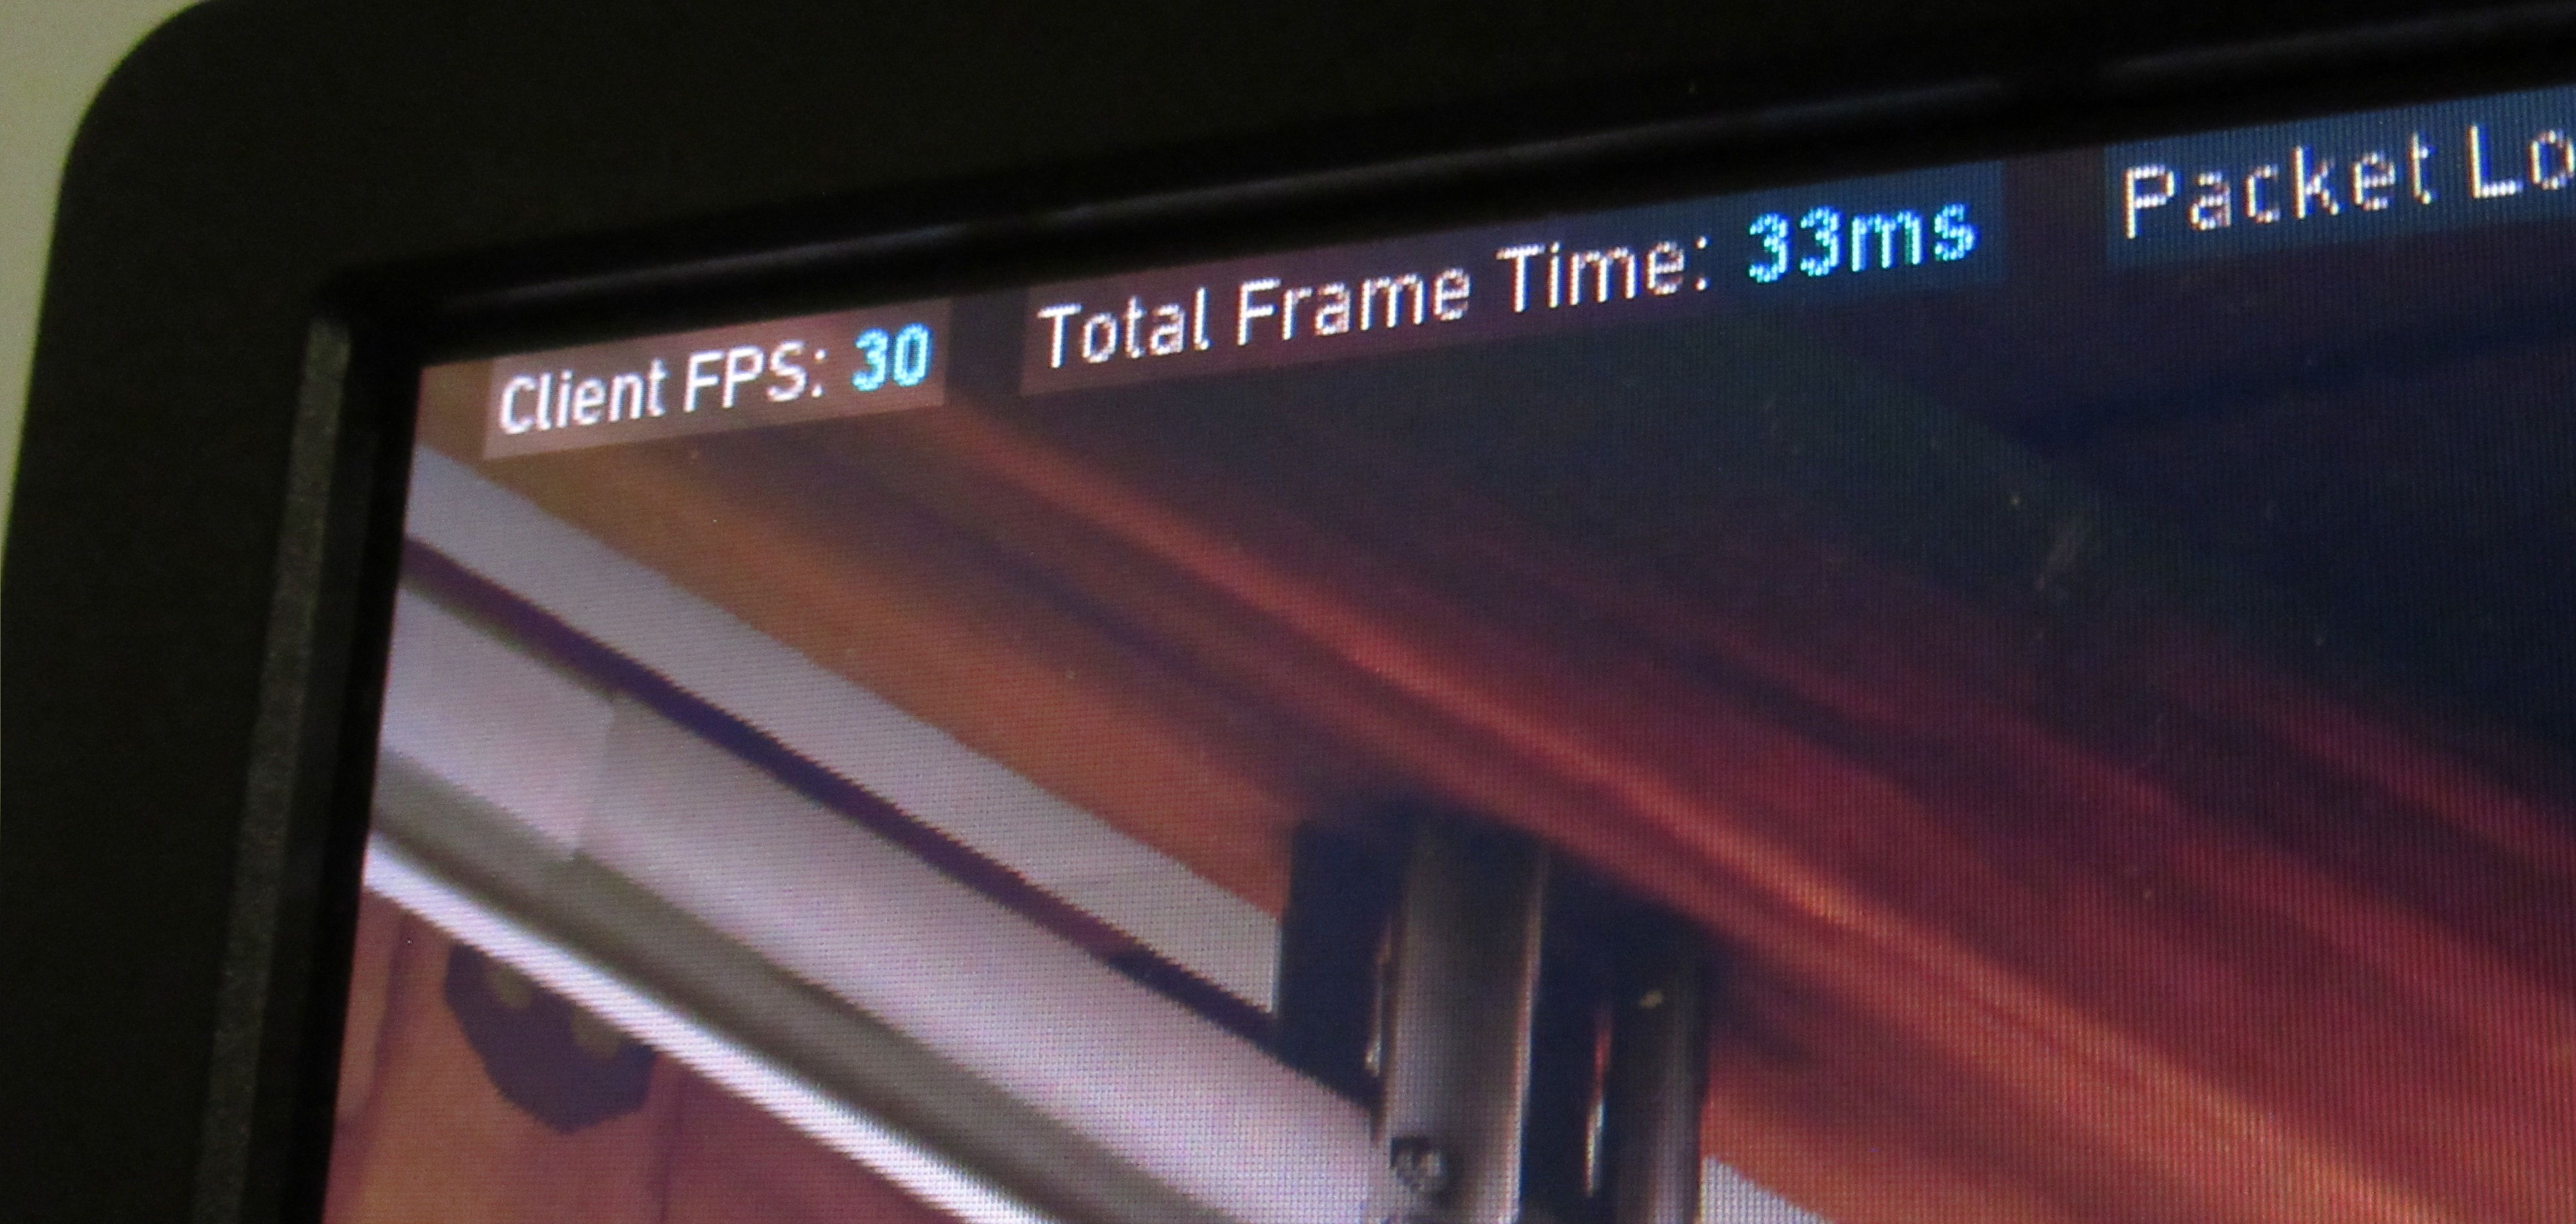 Frame rate and frame time